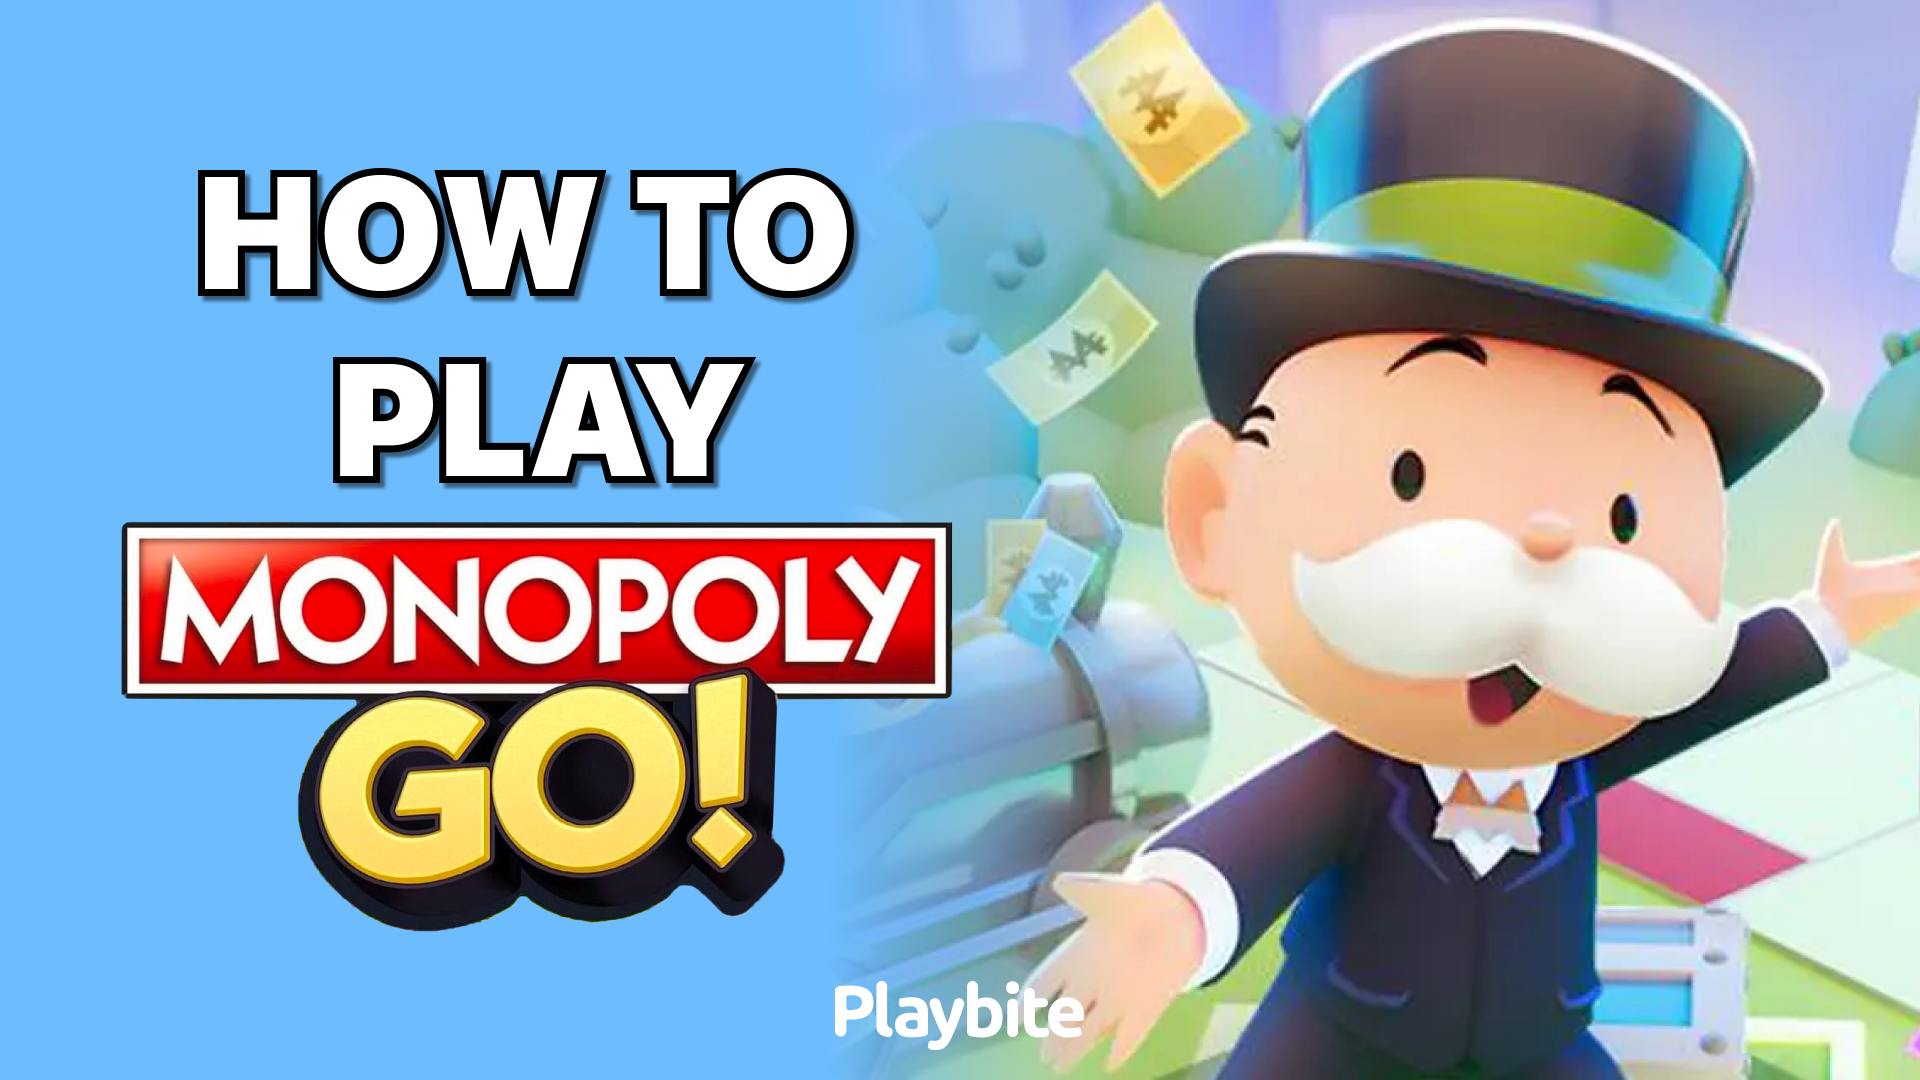 How To Play Monopoly GO!